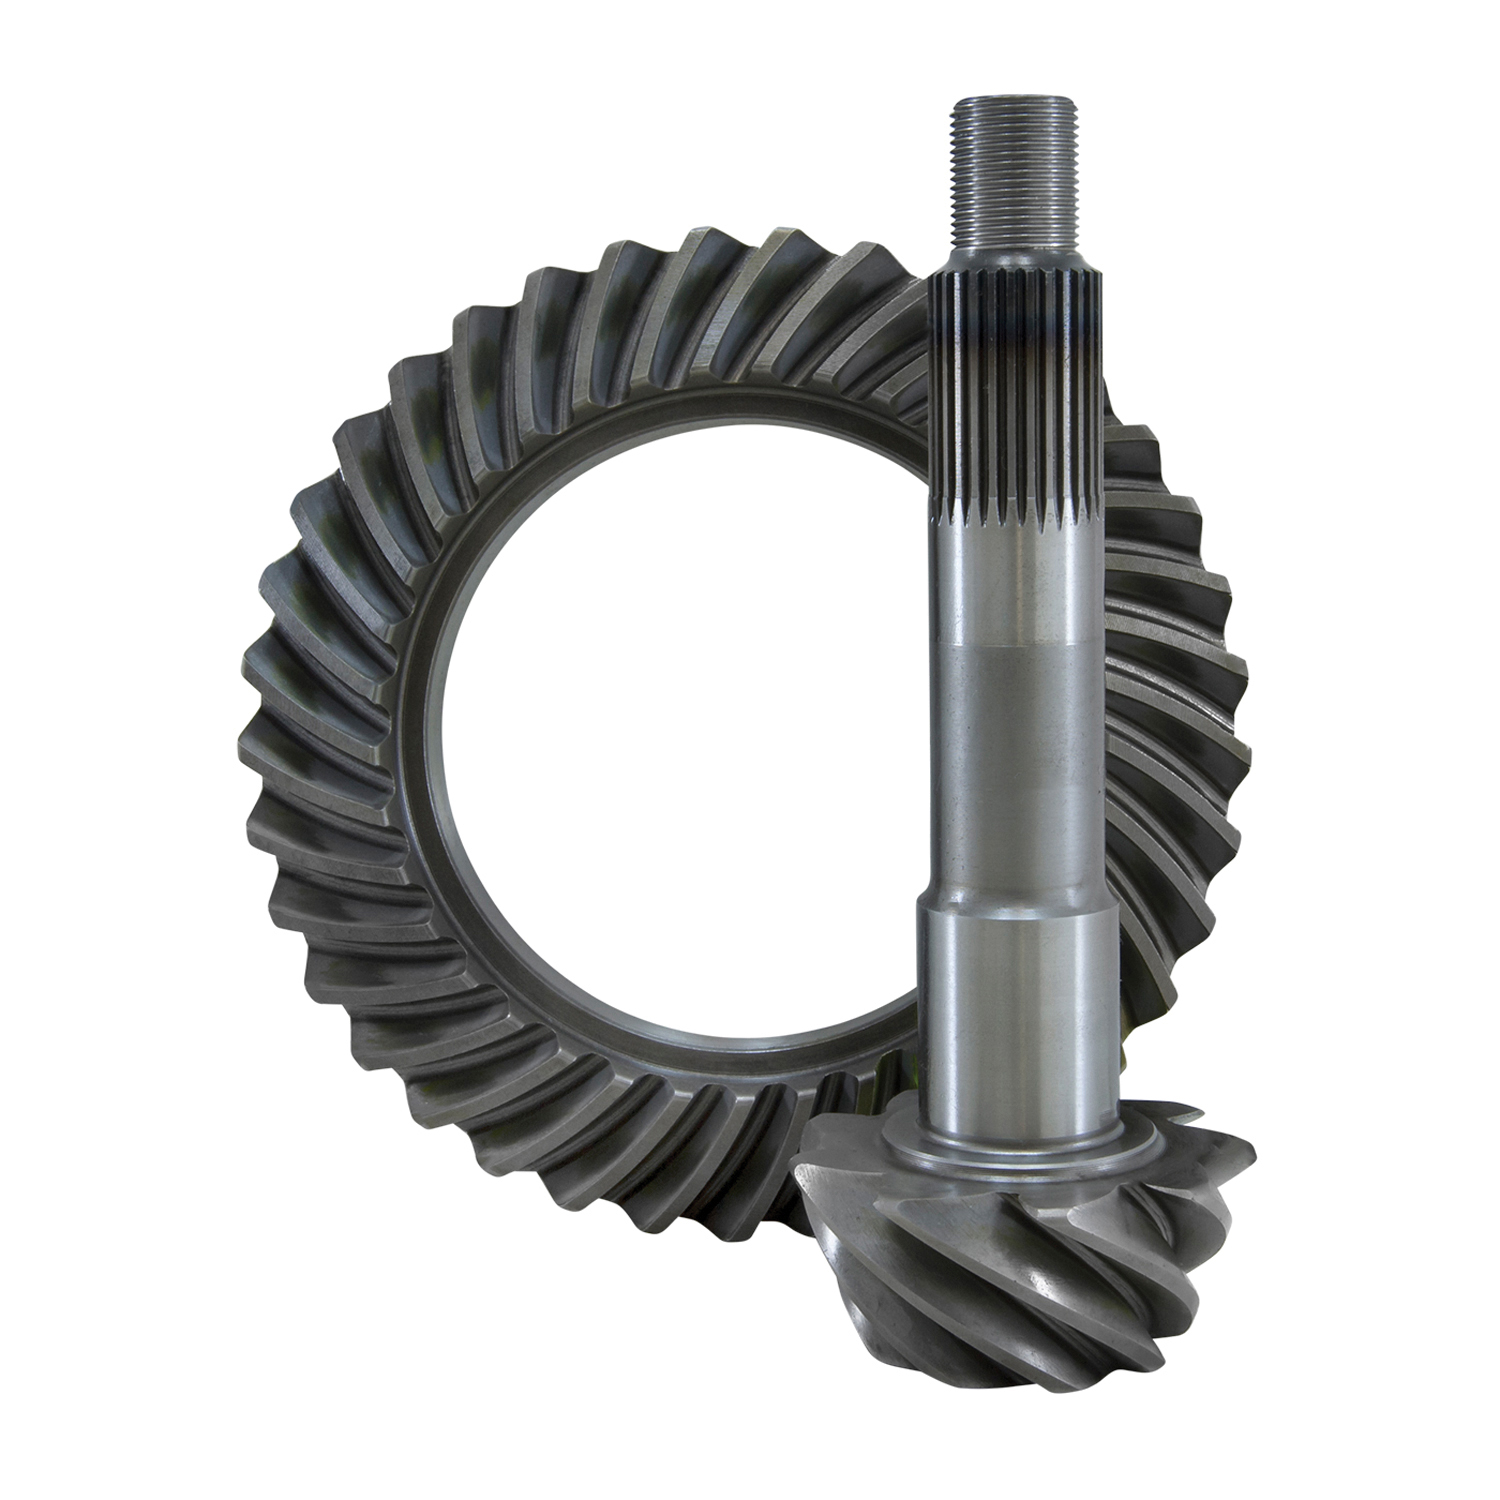 USA Standard Ring & Pinion gear set for Toyota 8" in a 5.29 ratio